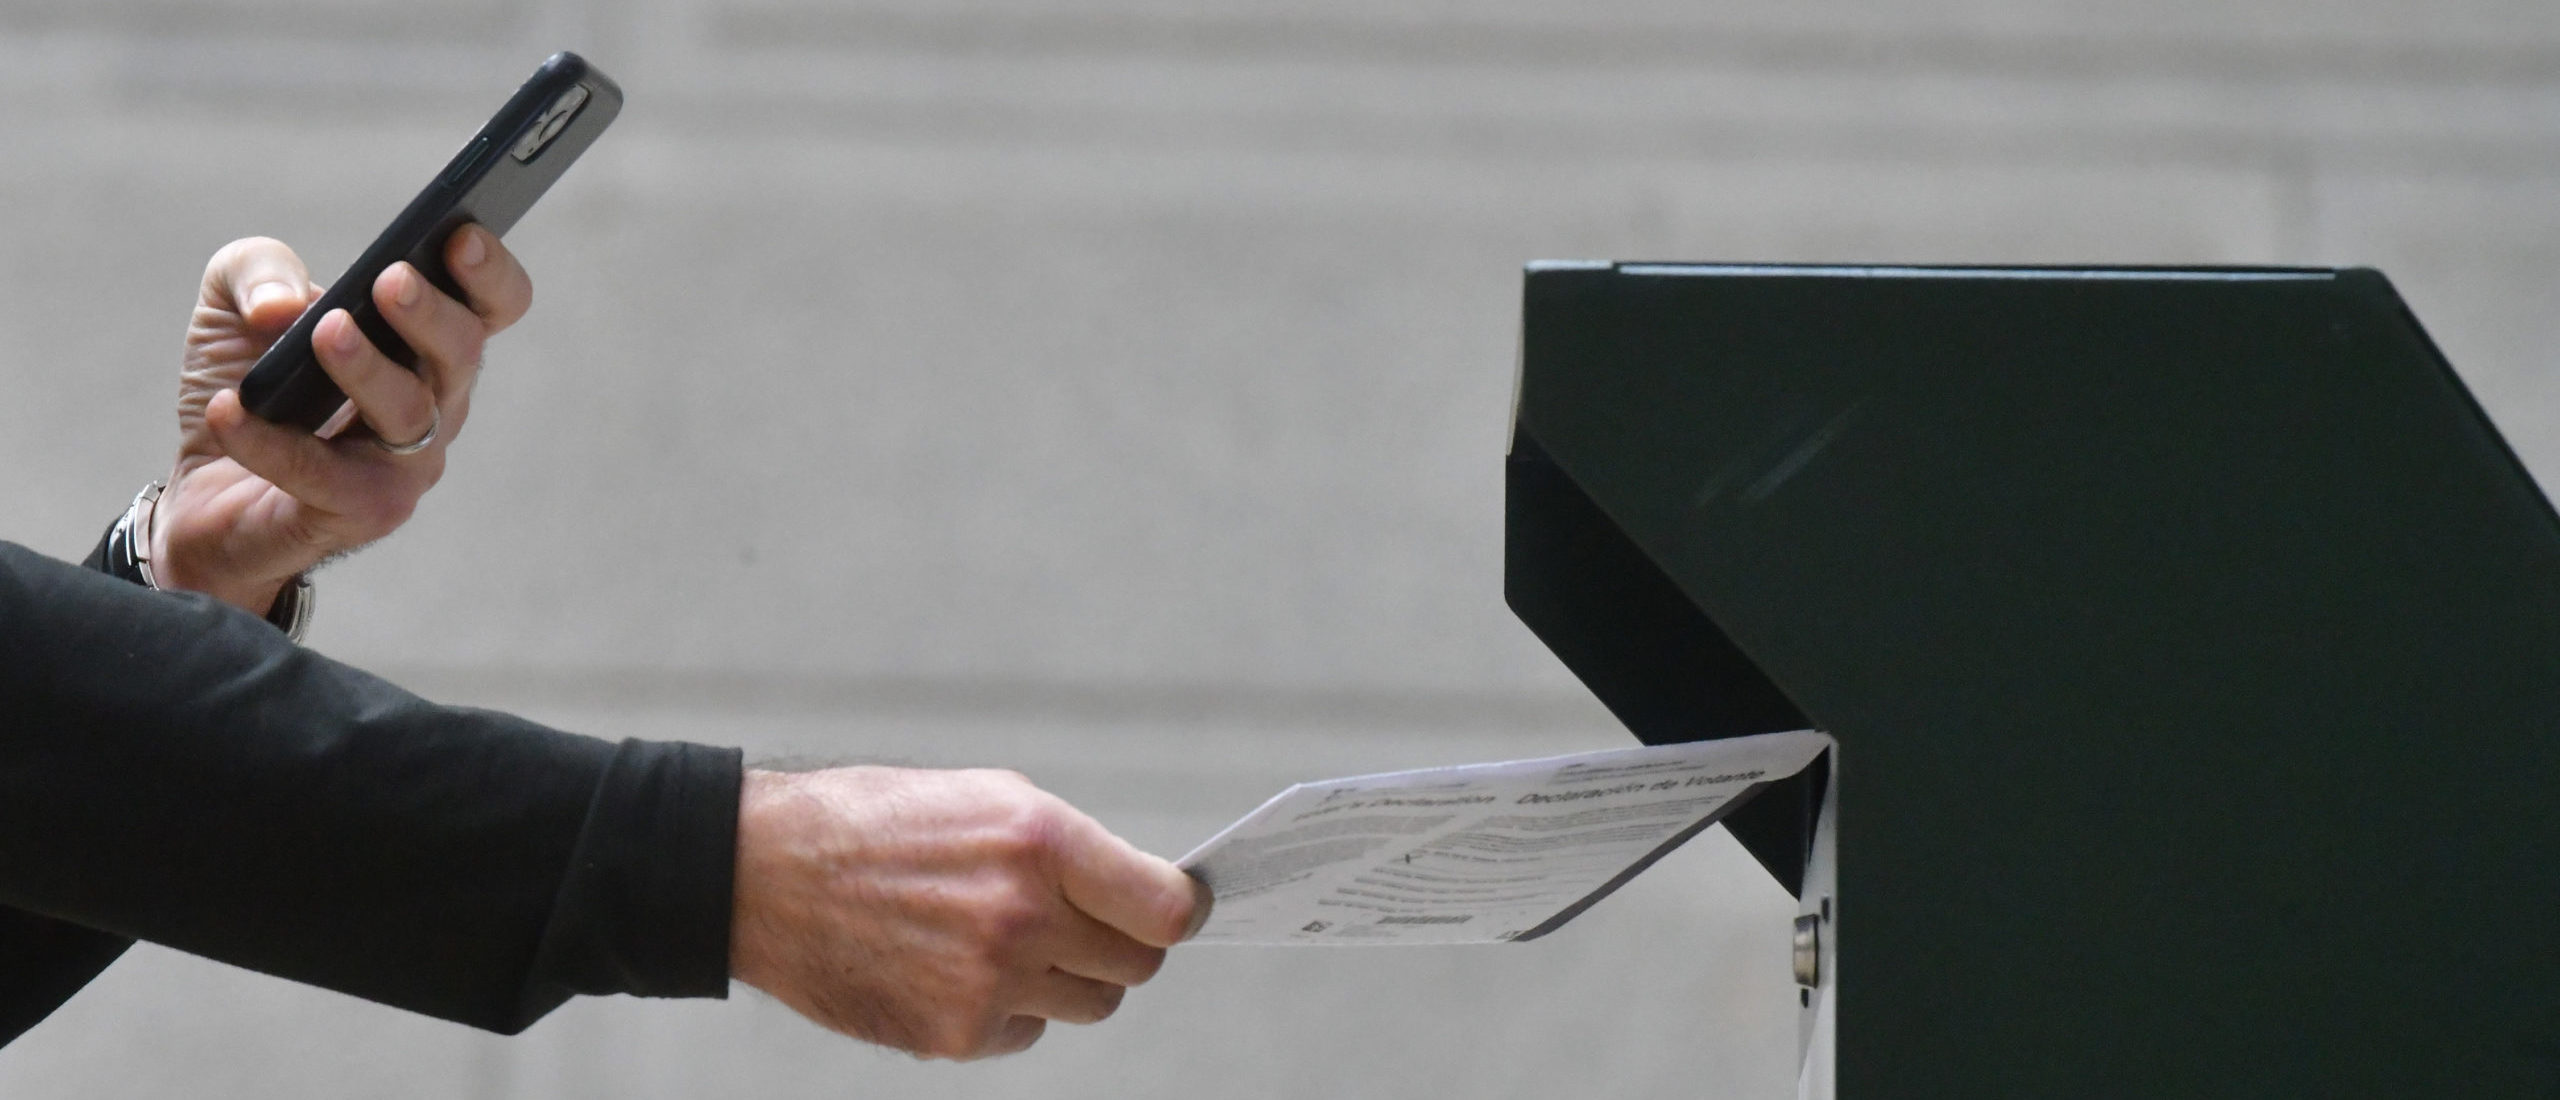 PHILADELPHIA, PA - OCTOBER 27: A man photographs himself depositing his ballot in an official ballot drop box while a long line of voters queue outside of Philadelphia City Hall at the satellite polling station on October 27, 2020 in Philadelphia, Pennsylvania. With the election only a week away, this new form of in-person voting by using mail ballots has enabled tens of millions of voters to cast their ballots before the general election. Vying to recapture the Keystone State's vital 20 electoral votes in order to bolster his reelection prospects, President Donald Trump held three rallies throughout Pennsylvania yesterday. (Photo by Mark Makela/Getty Images)